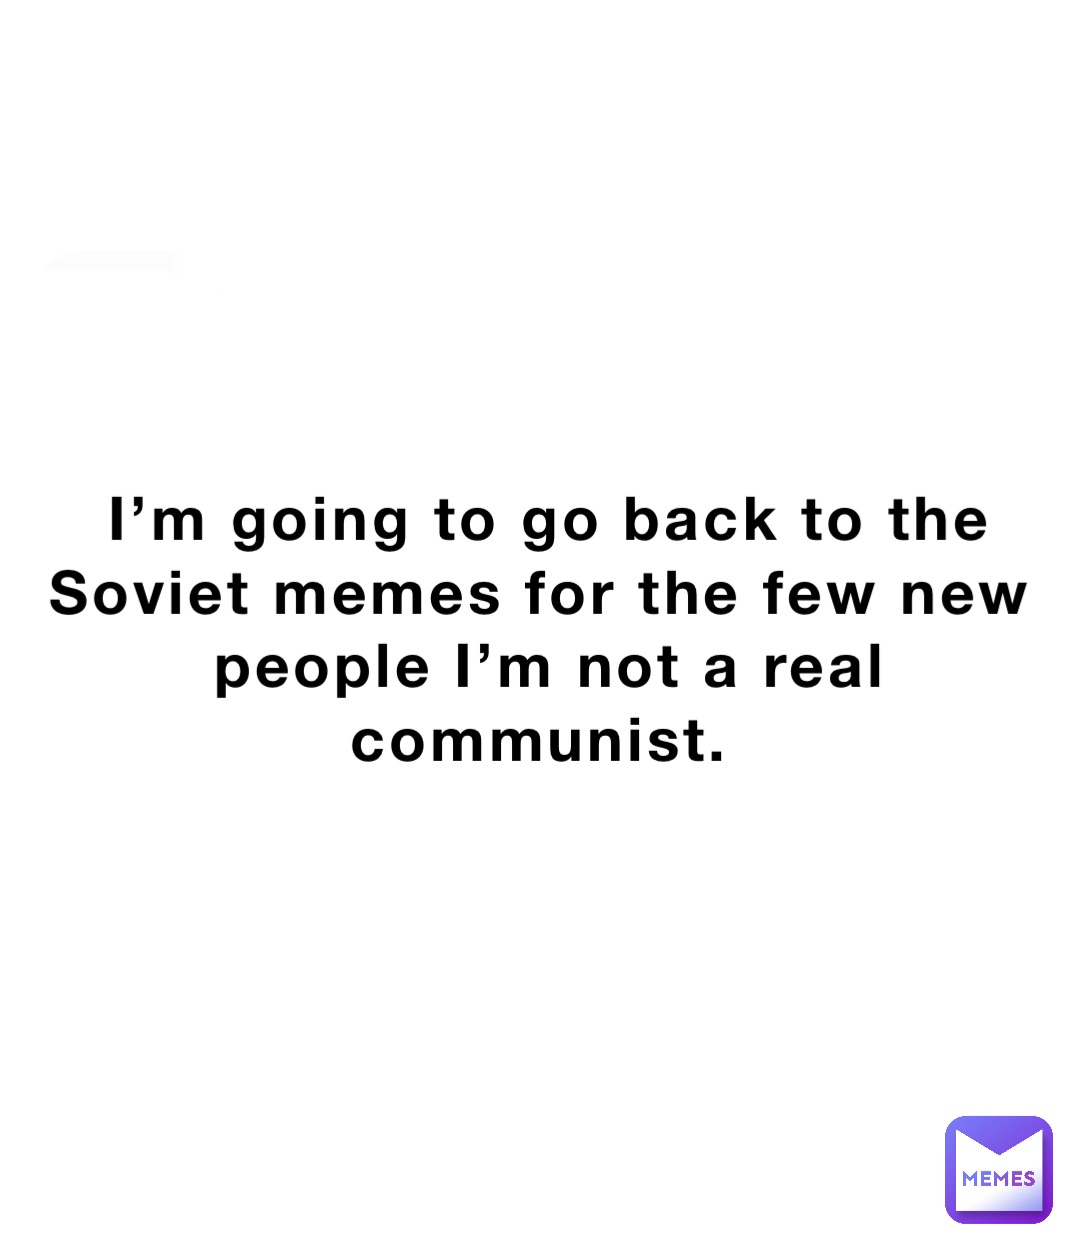 I’m going to go back to the Soviet memes for the few new people I’m not a real communist.